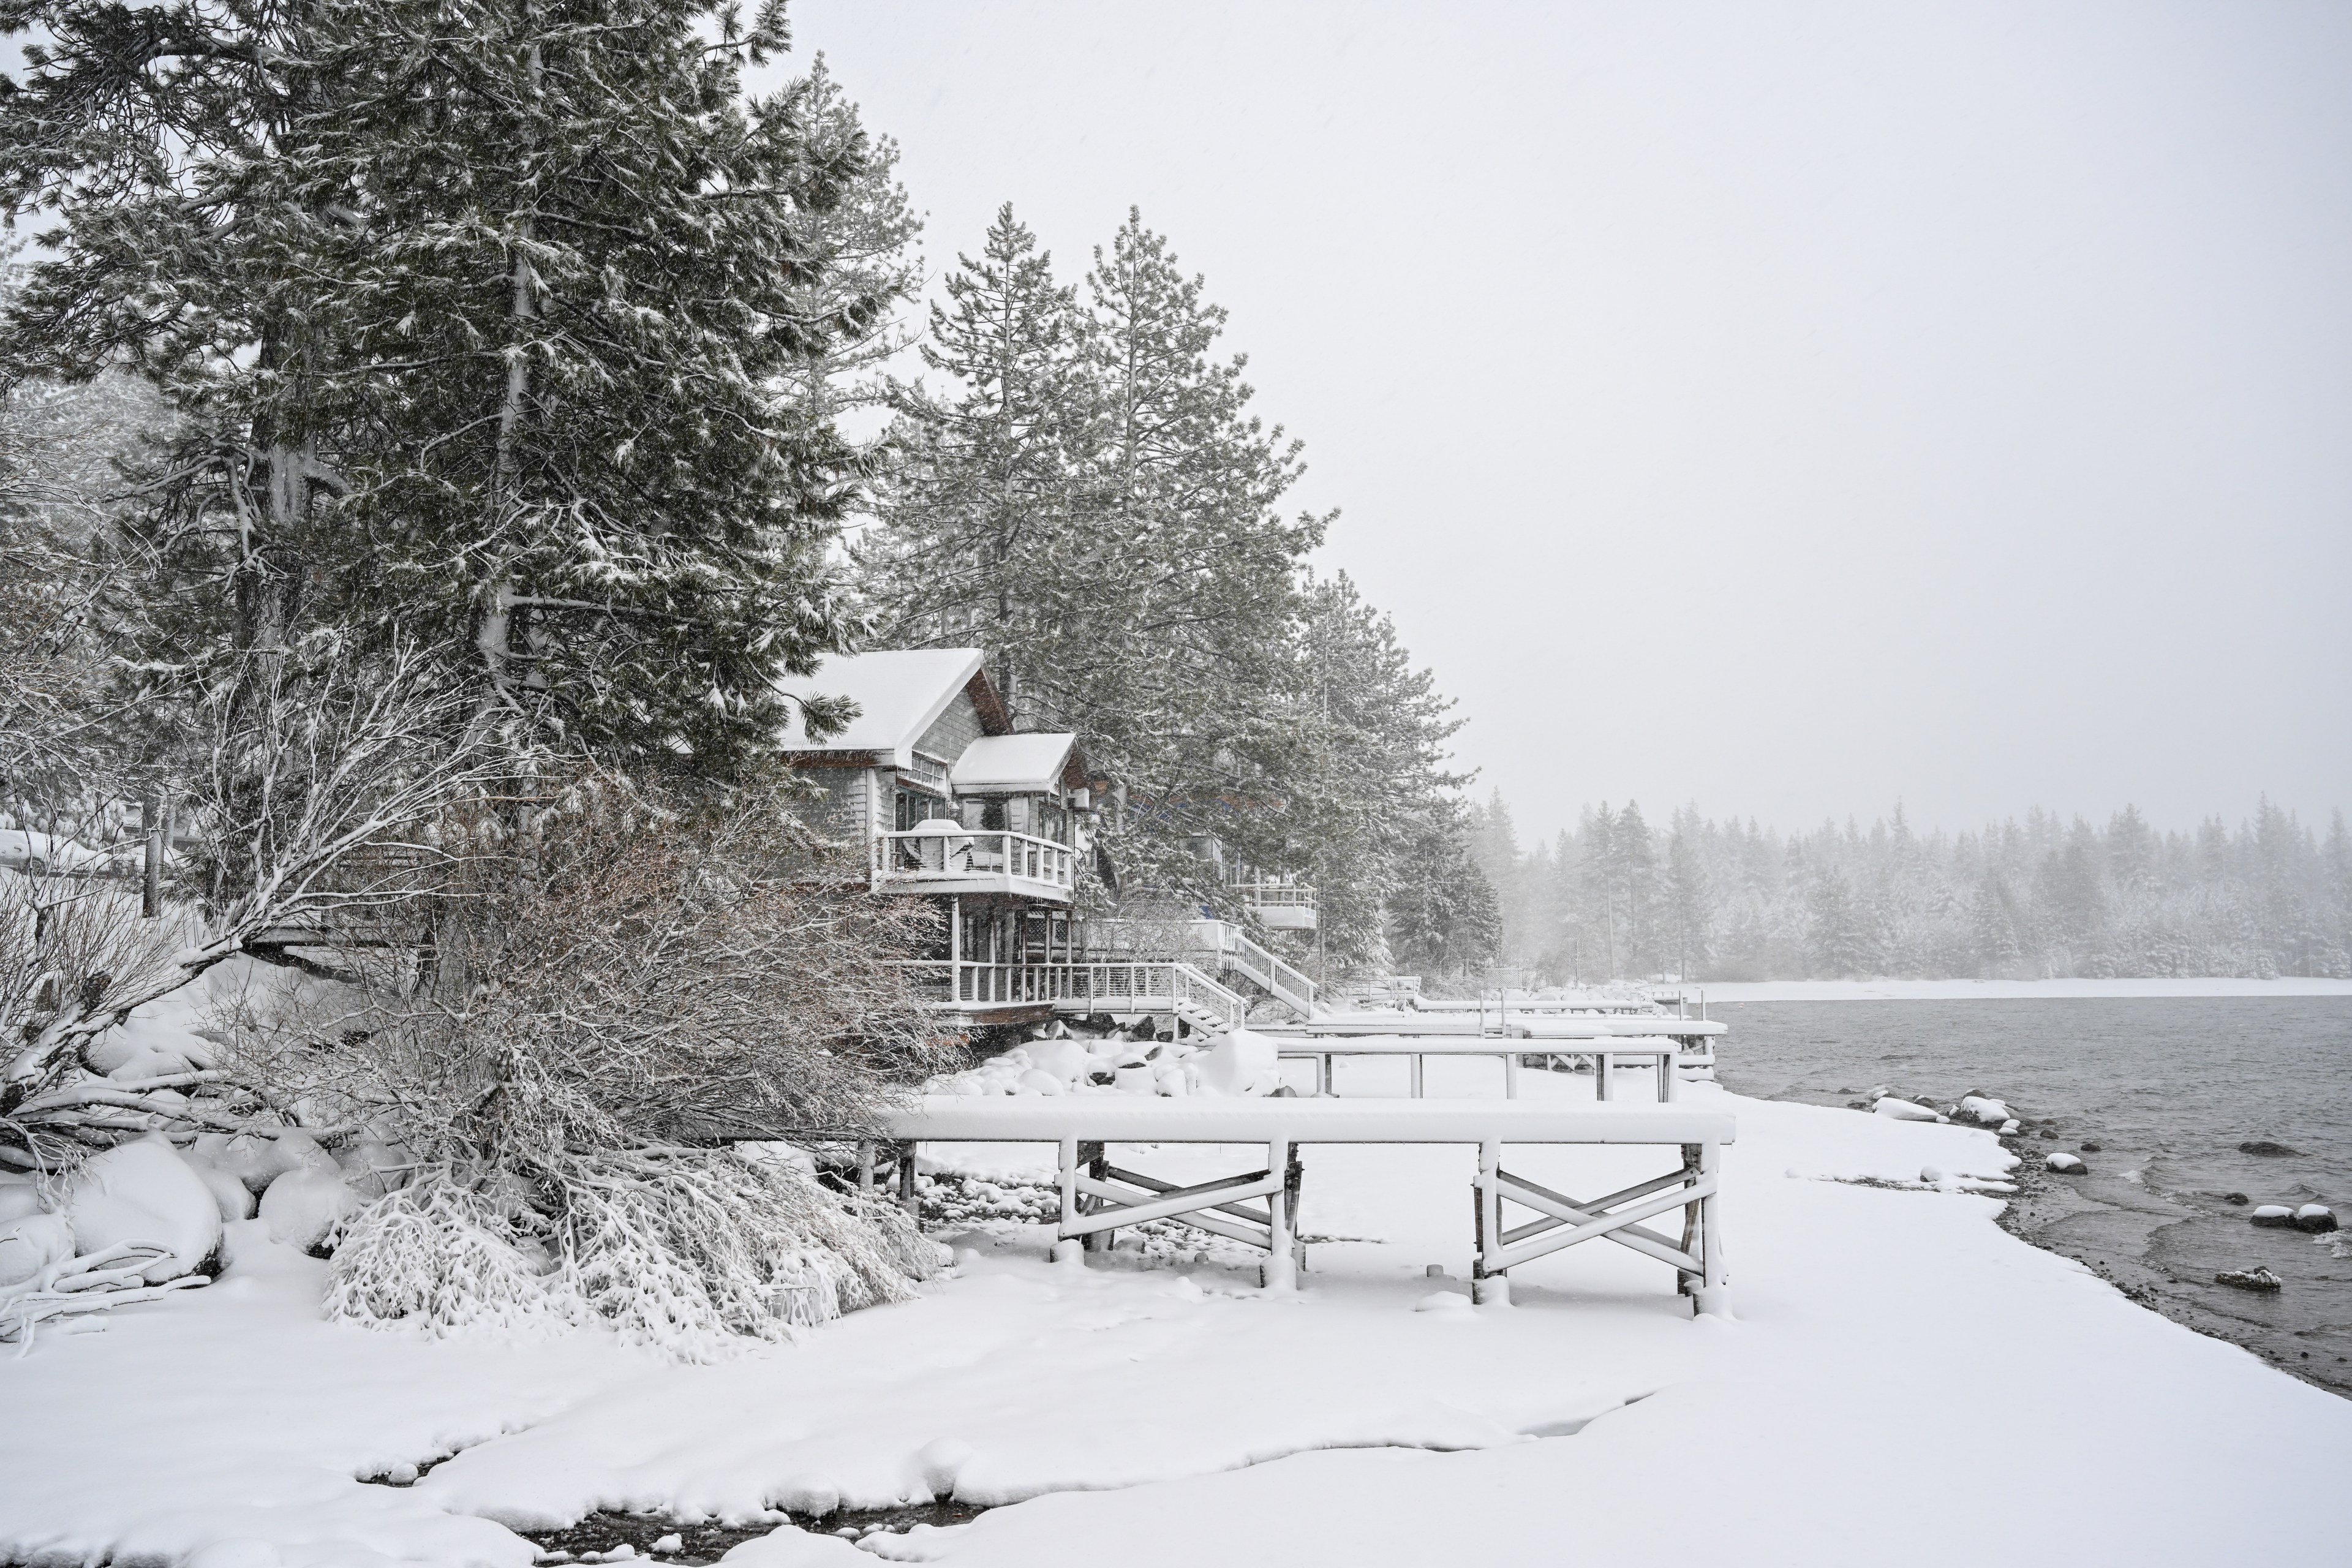 Snow covers piers and homes at the edge of a lake